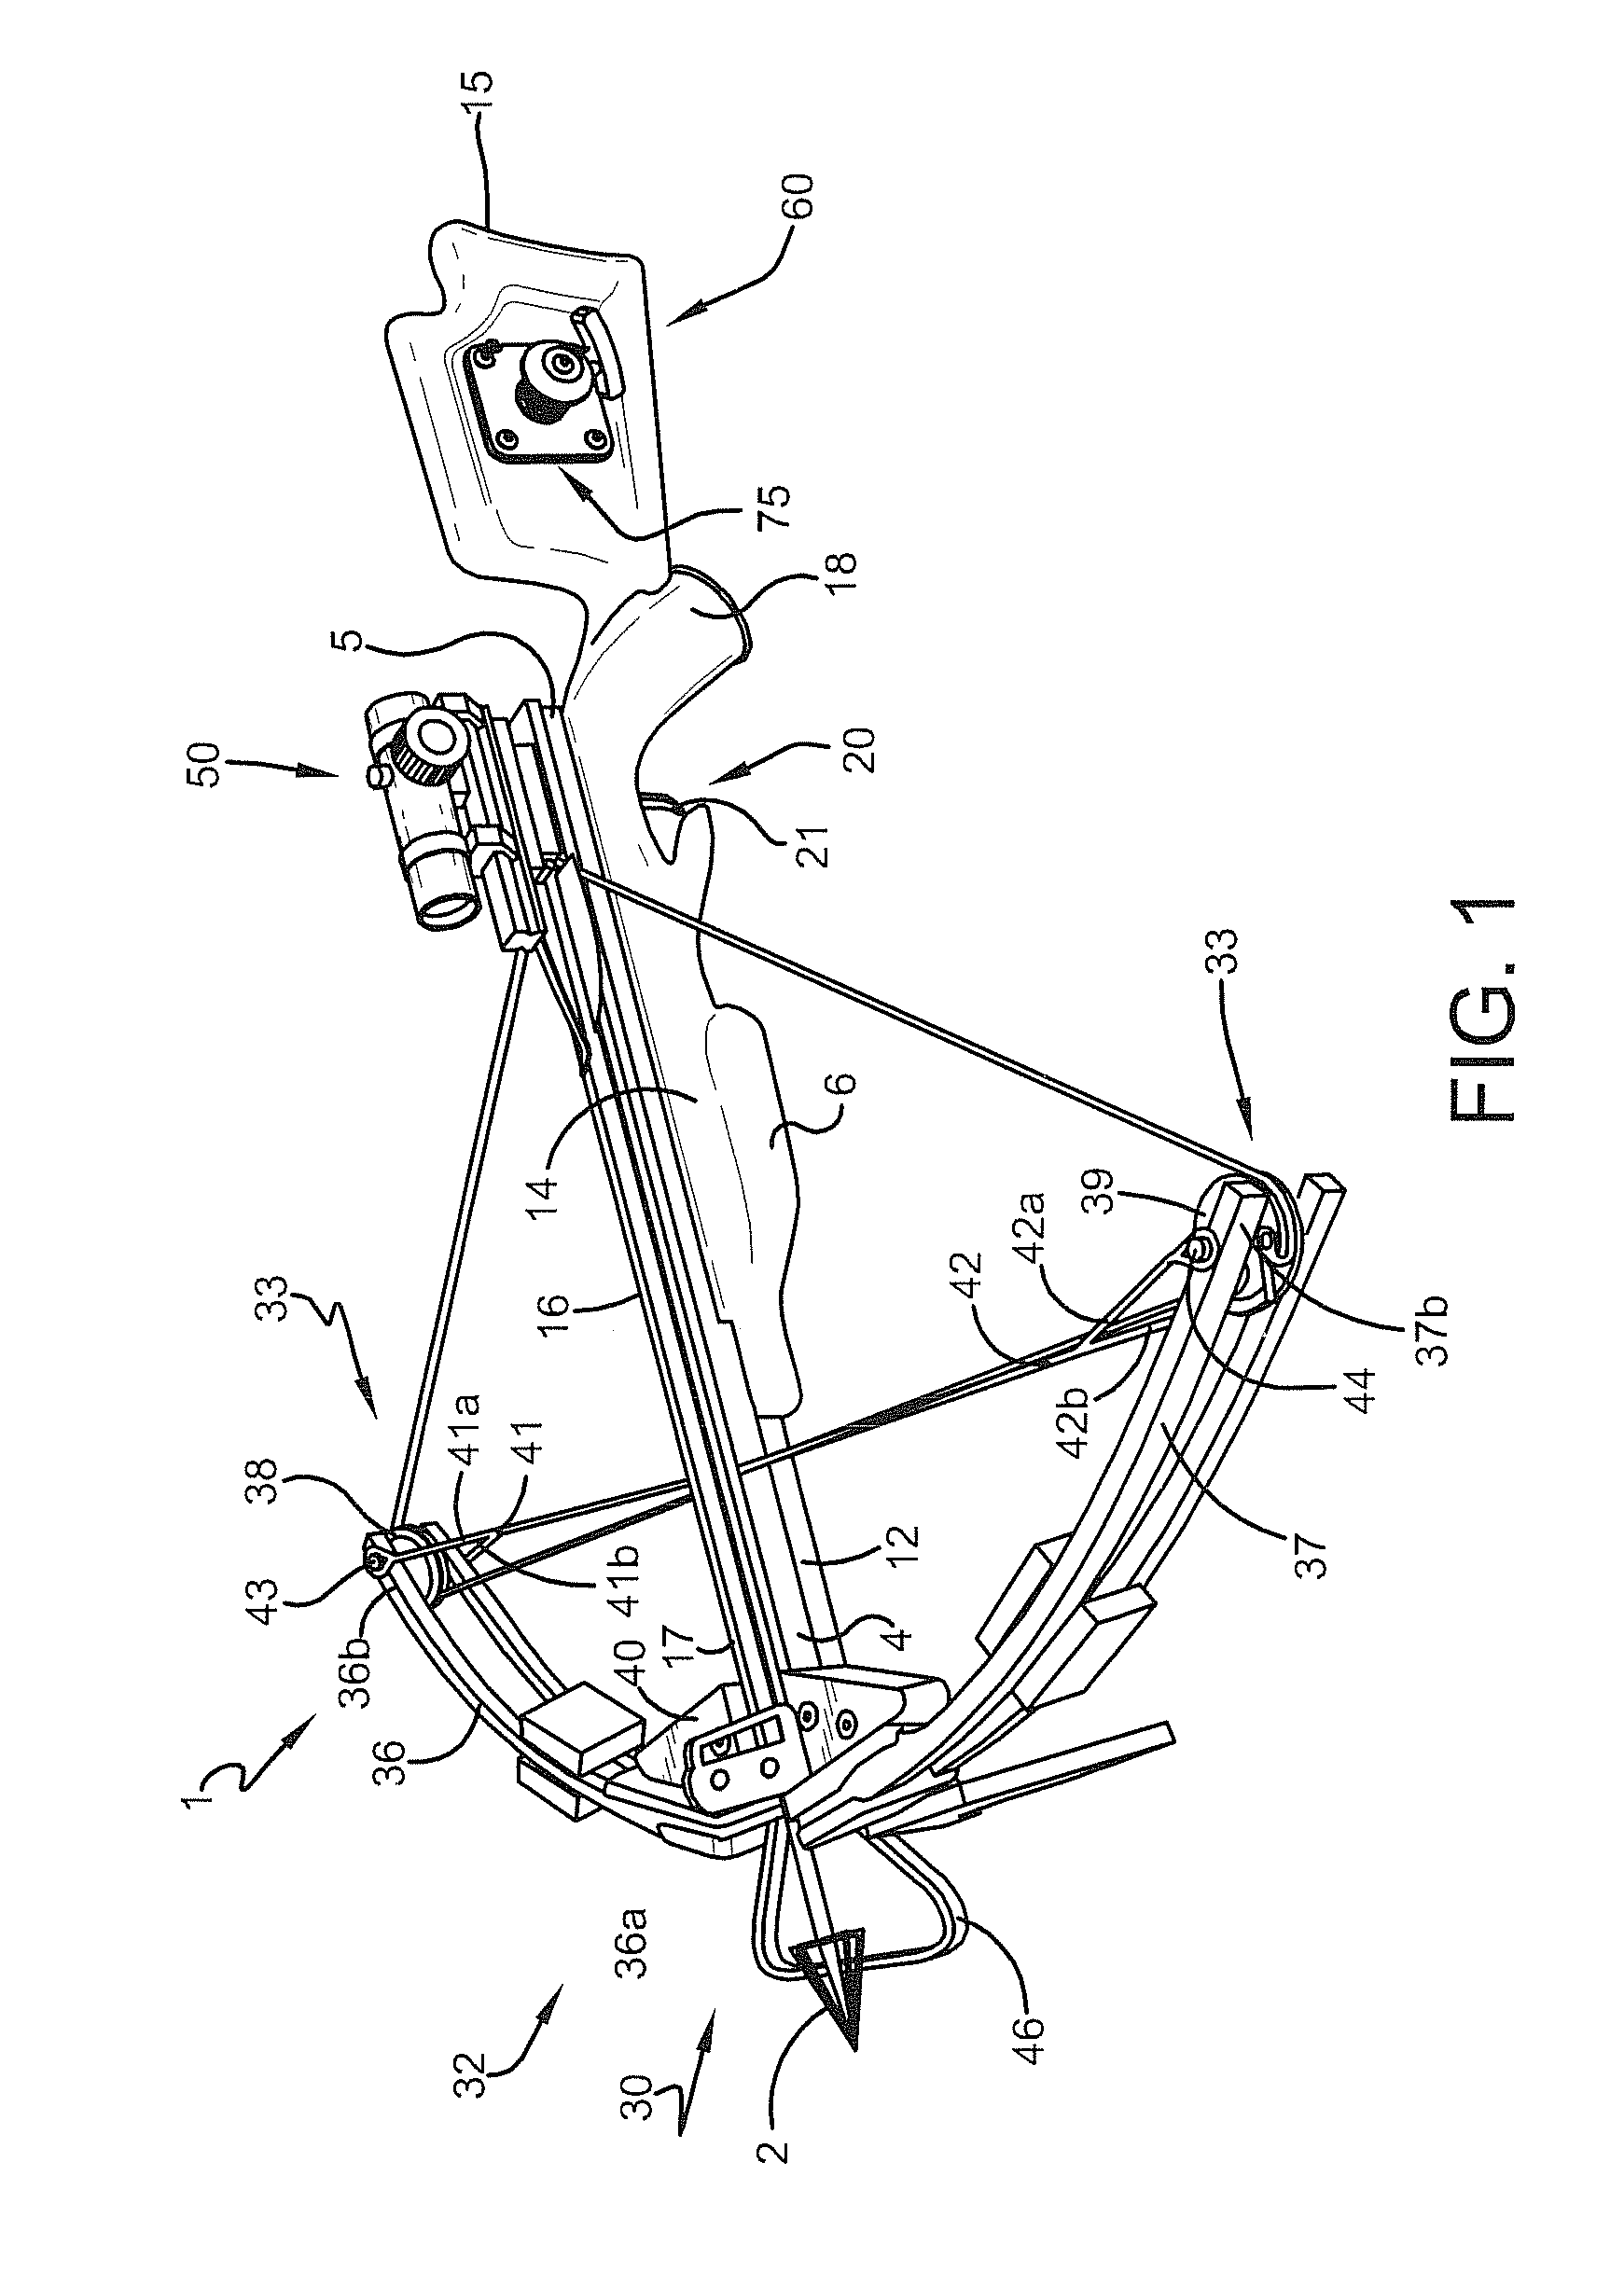 Integrated cocking device